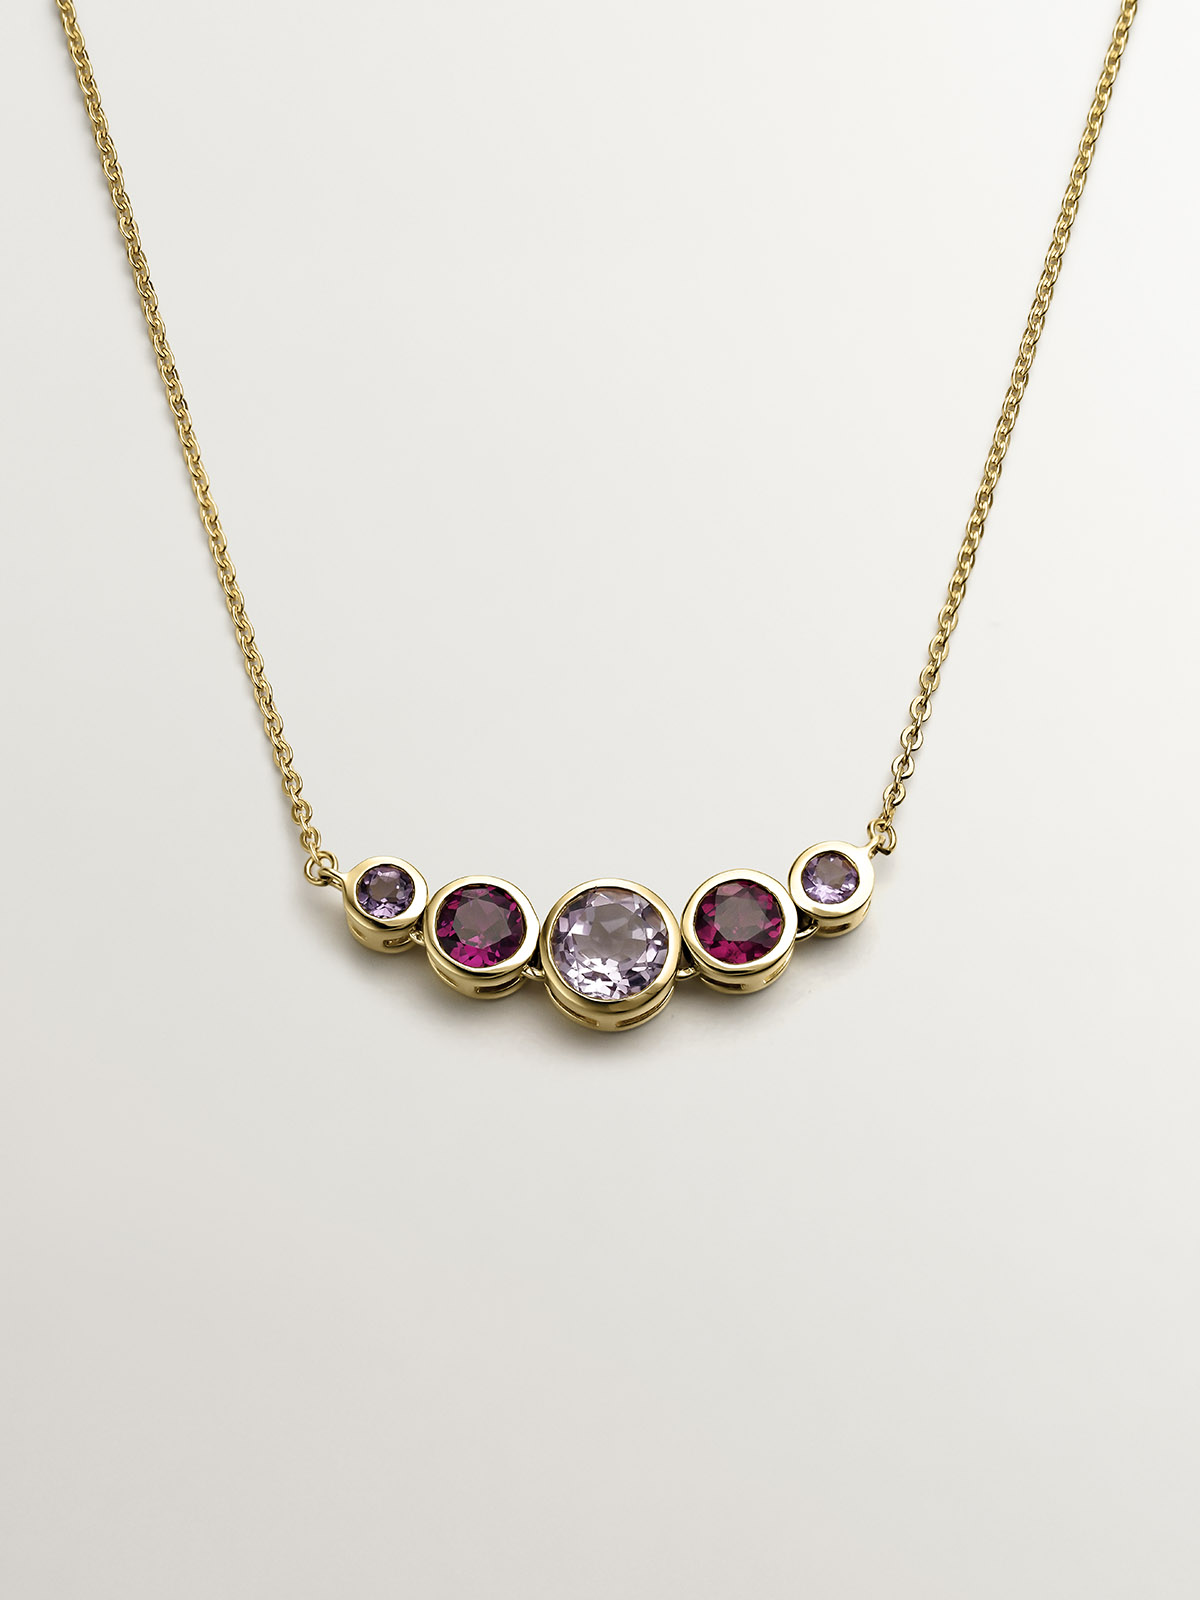 925 Silver pendant bathed in 18K yellow gold with pink rhodolites and purple amethysts.